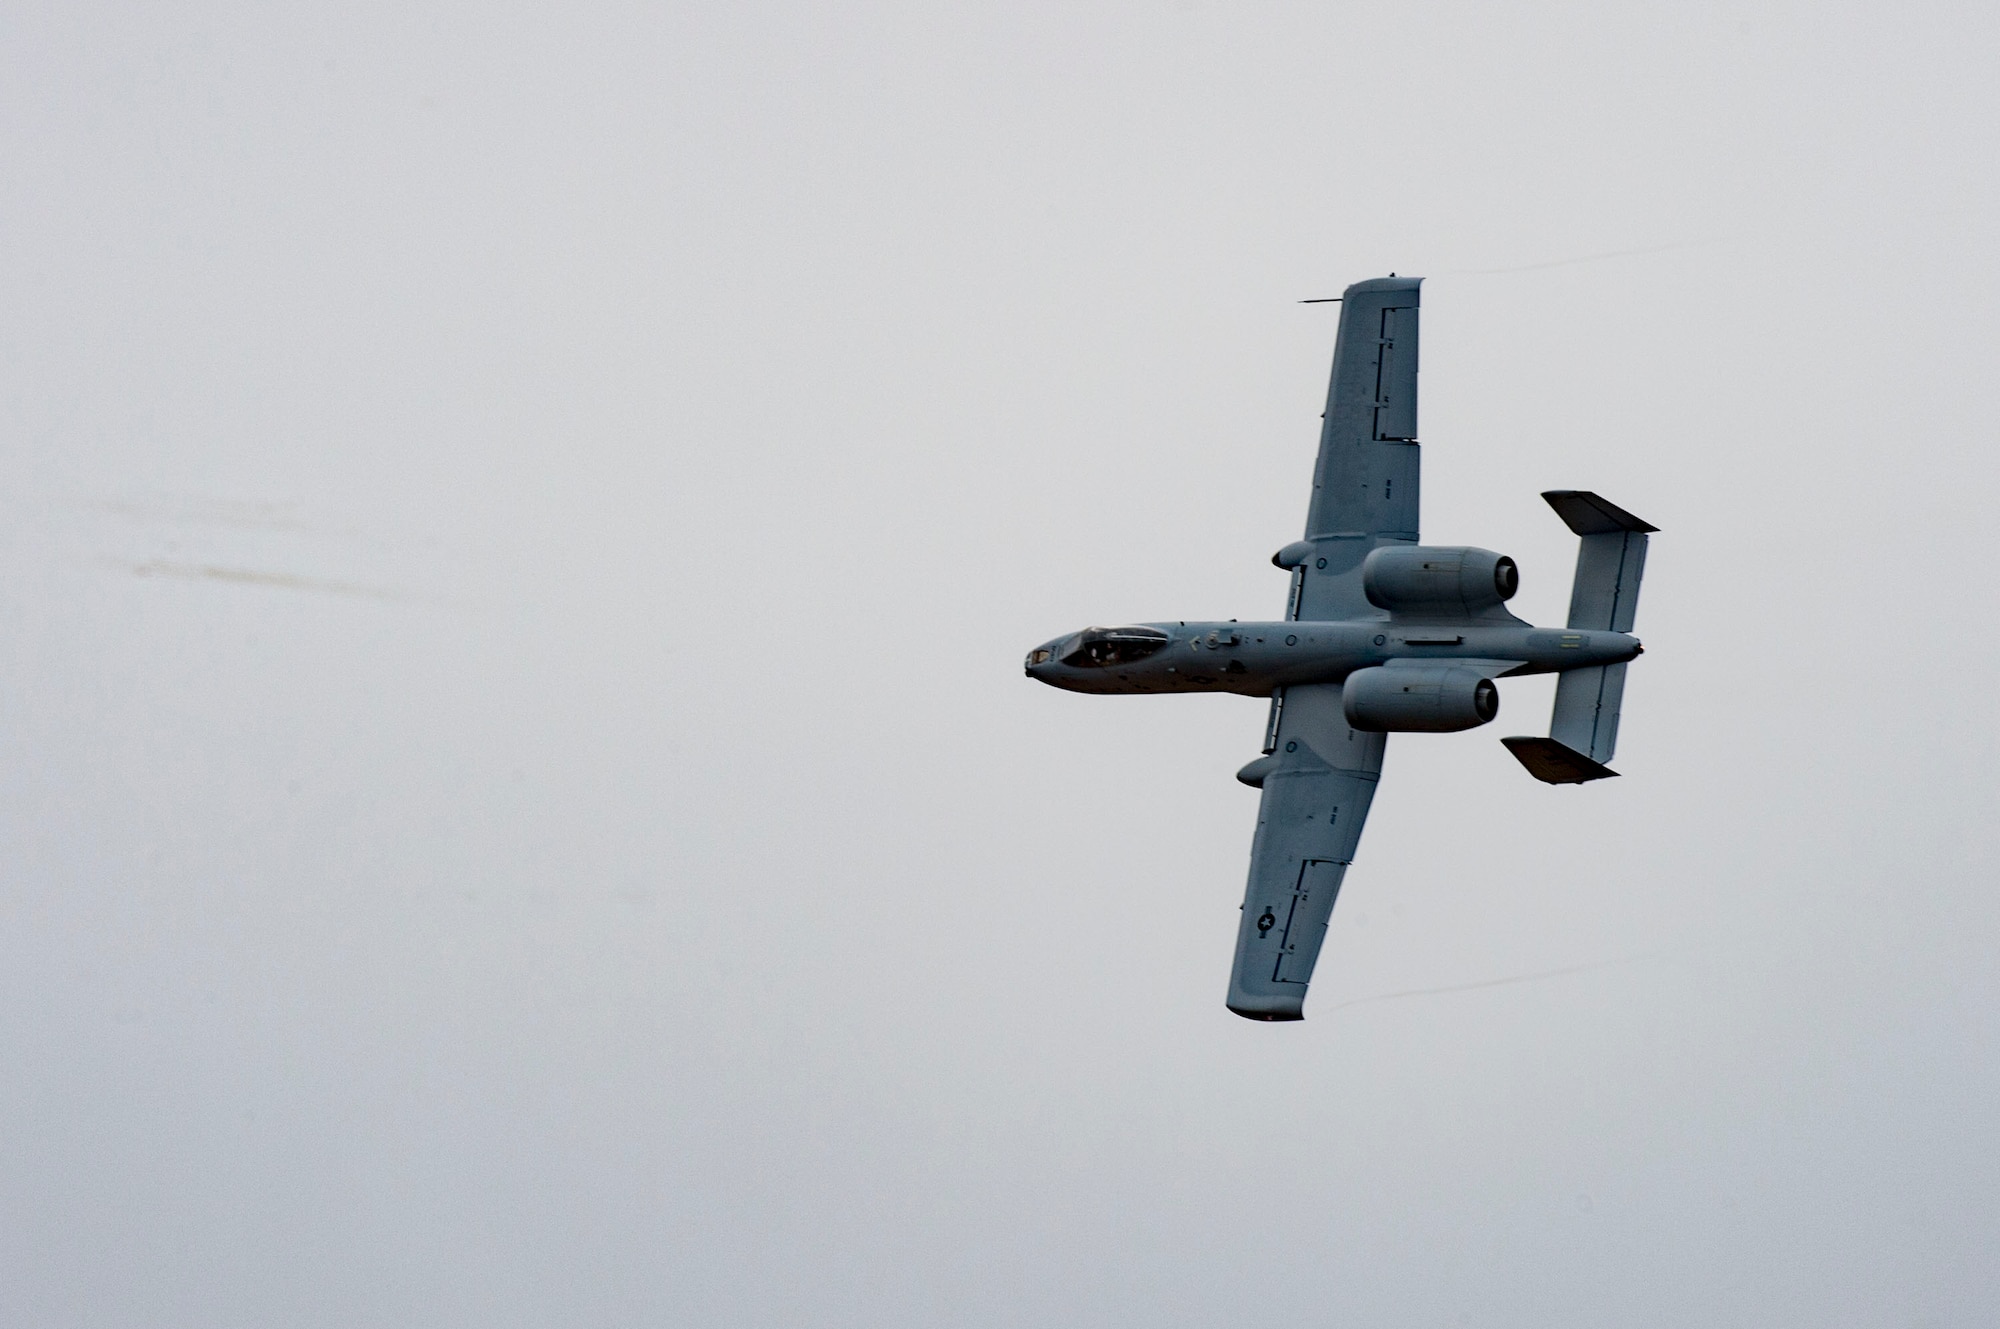 An A-10C Thunderbolt II flies above Camp Grayling, Mich., during a joint close air support exercise, April 13, 2017. To further build interoperability and hone their unique skillset, members of the German air force Air Ground Operations Squadron travelled to the U.S. to partner with the 19th Air Support Operations Squadron and conduct a close air support exercise working with A-10C Thunderbolts IIs and F-16 Fighting Falcons. (U.S. Air Force photo by Airman 1st Class Daniel Snider)